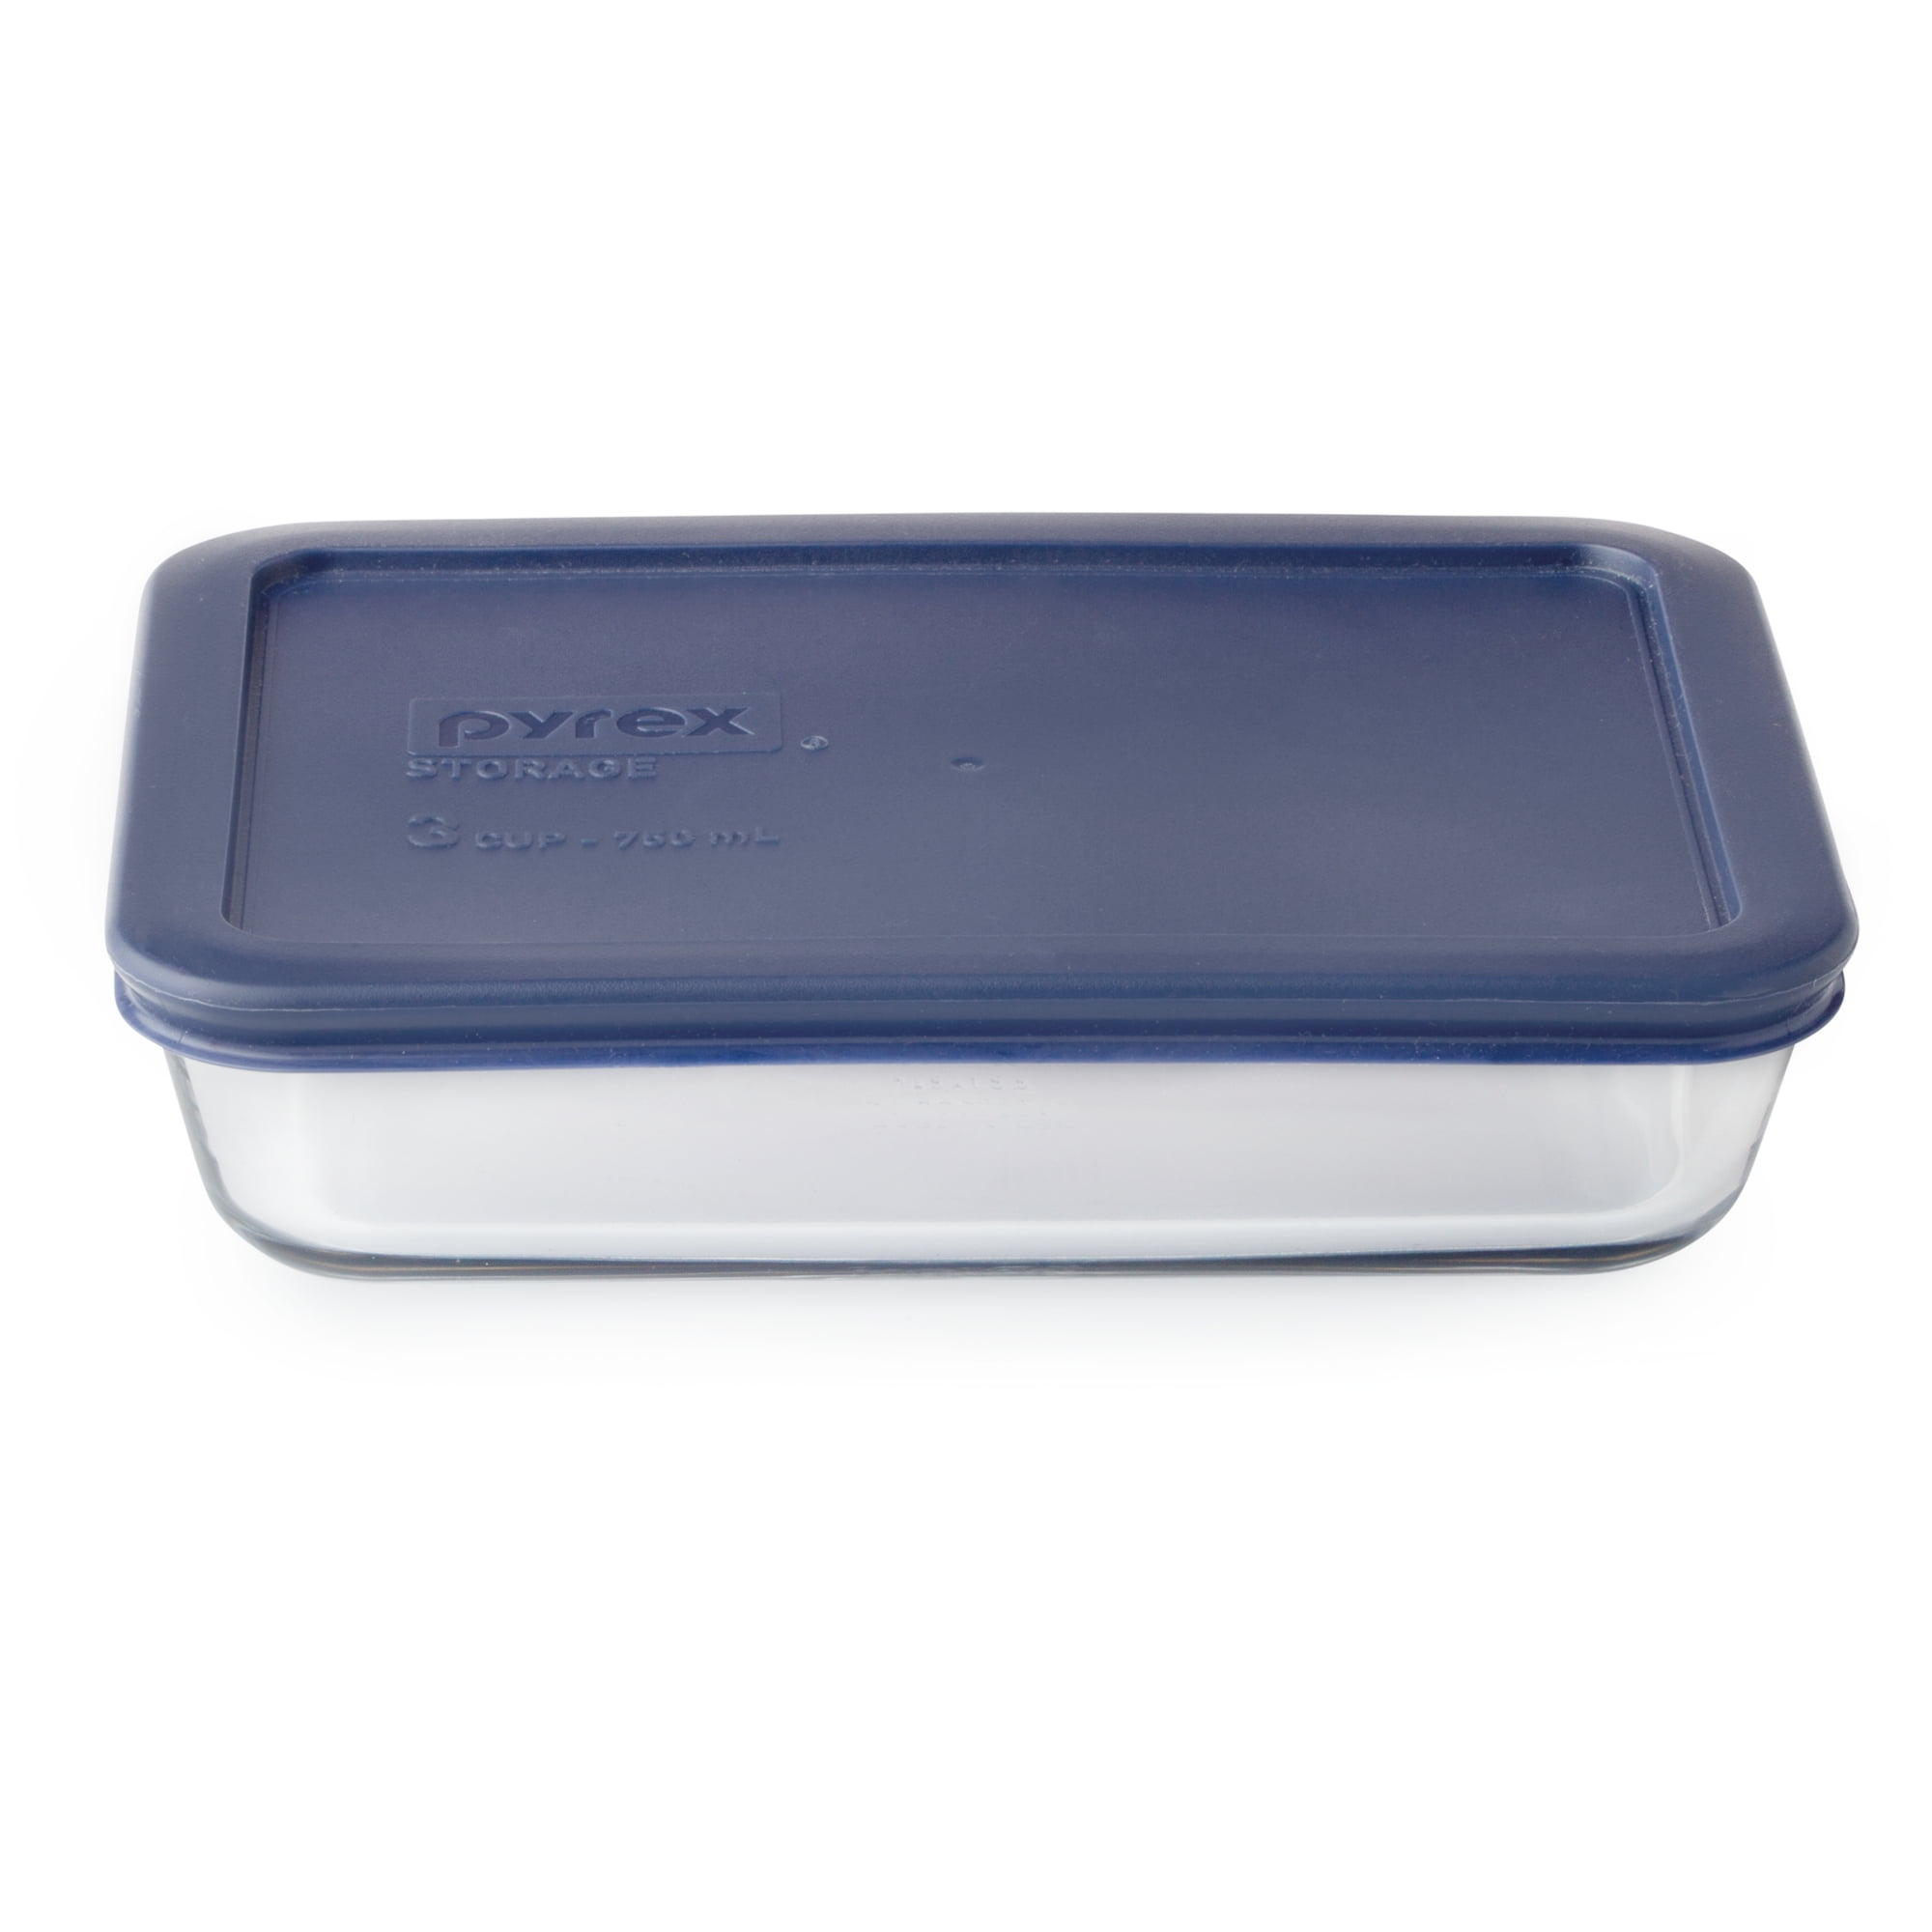  Pyrex Simply Store 10 Piece Set with Colored Lids